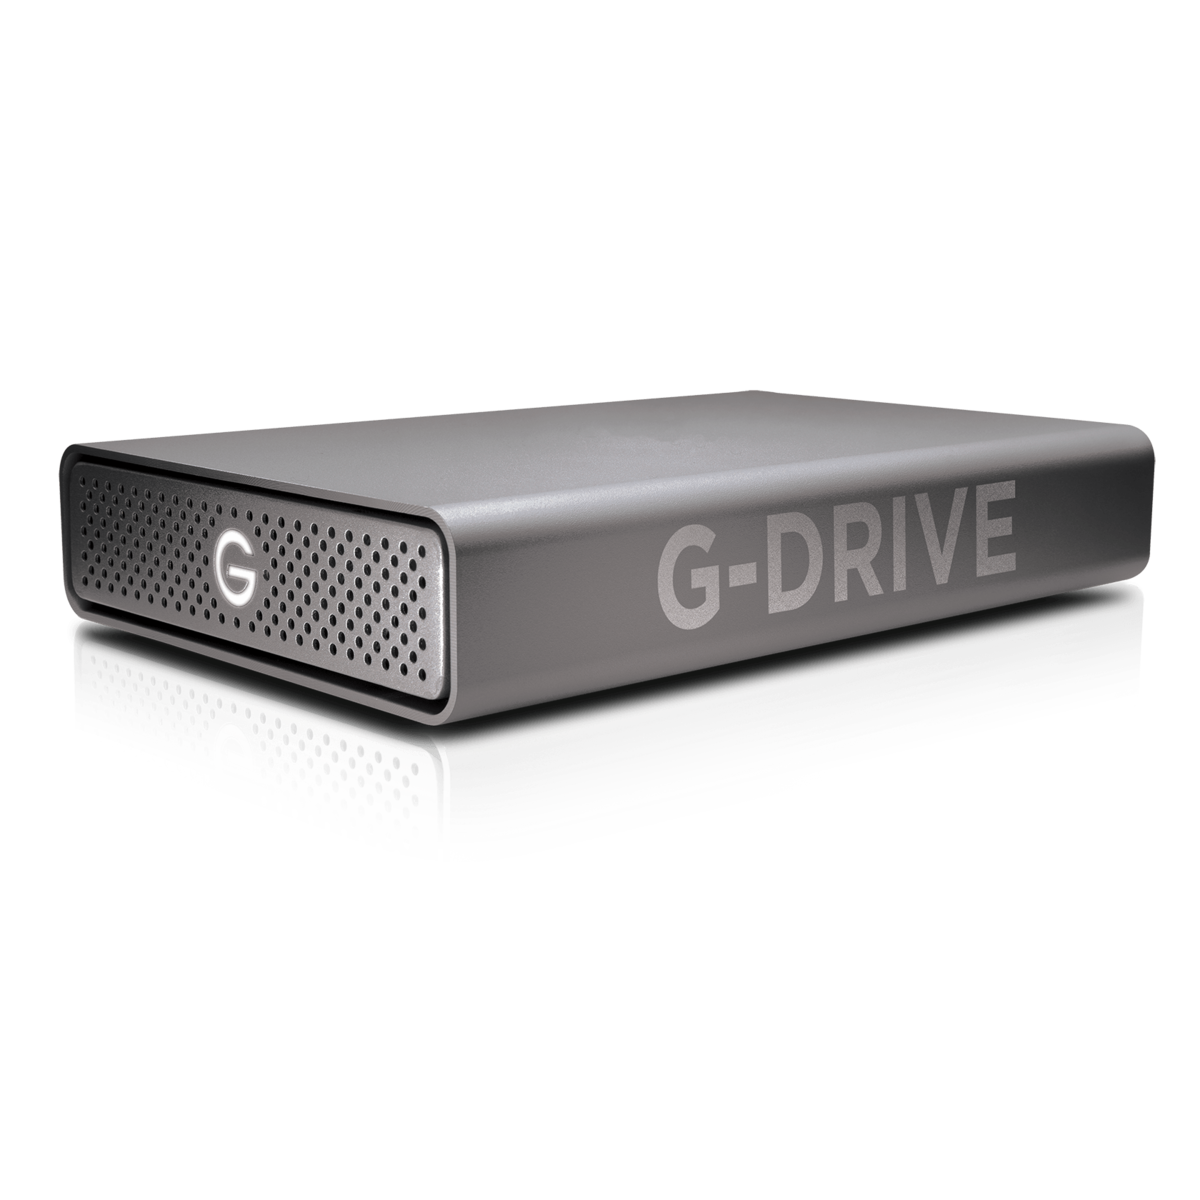 SanDisk Professional G-DRIVE Space Grey 4TB